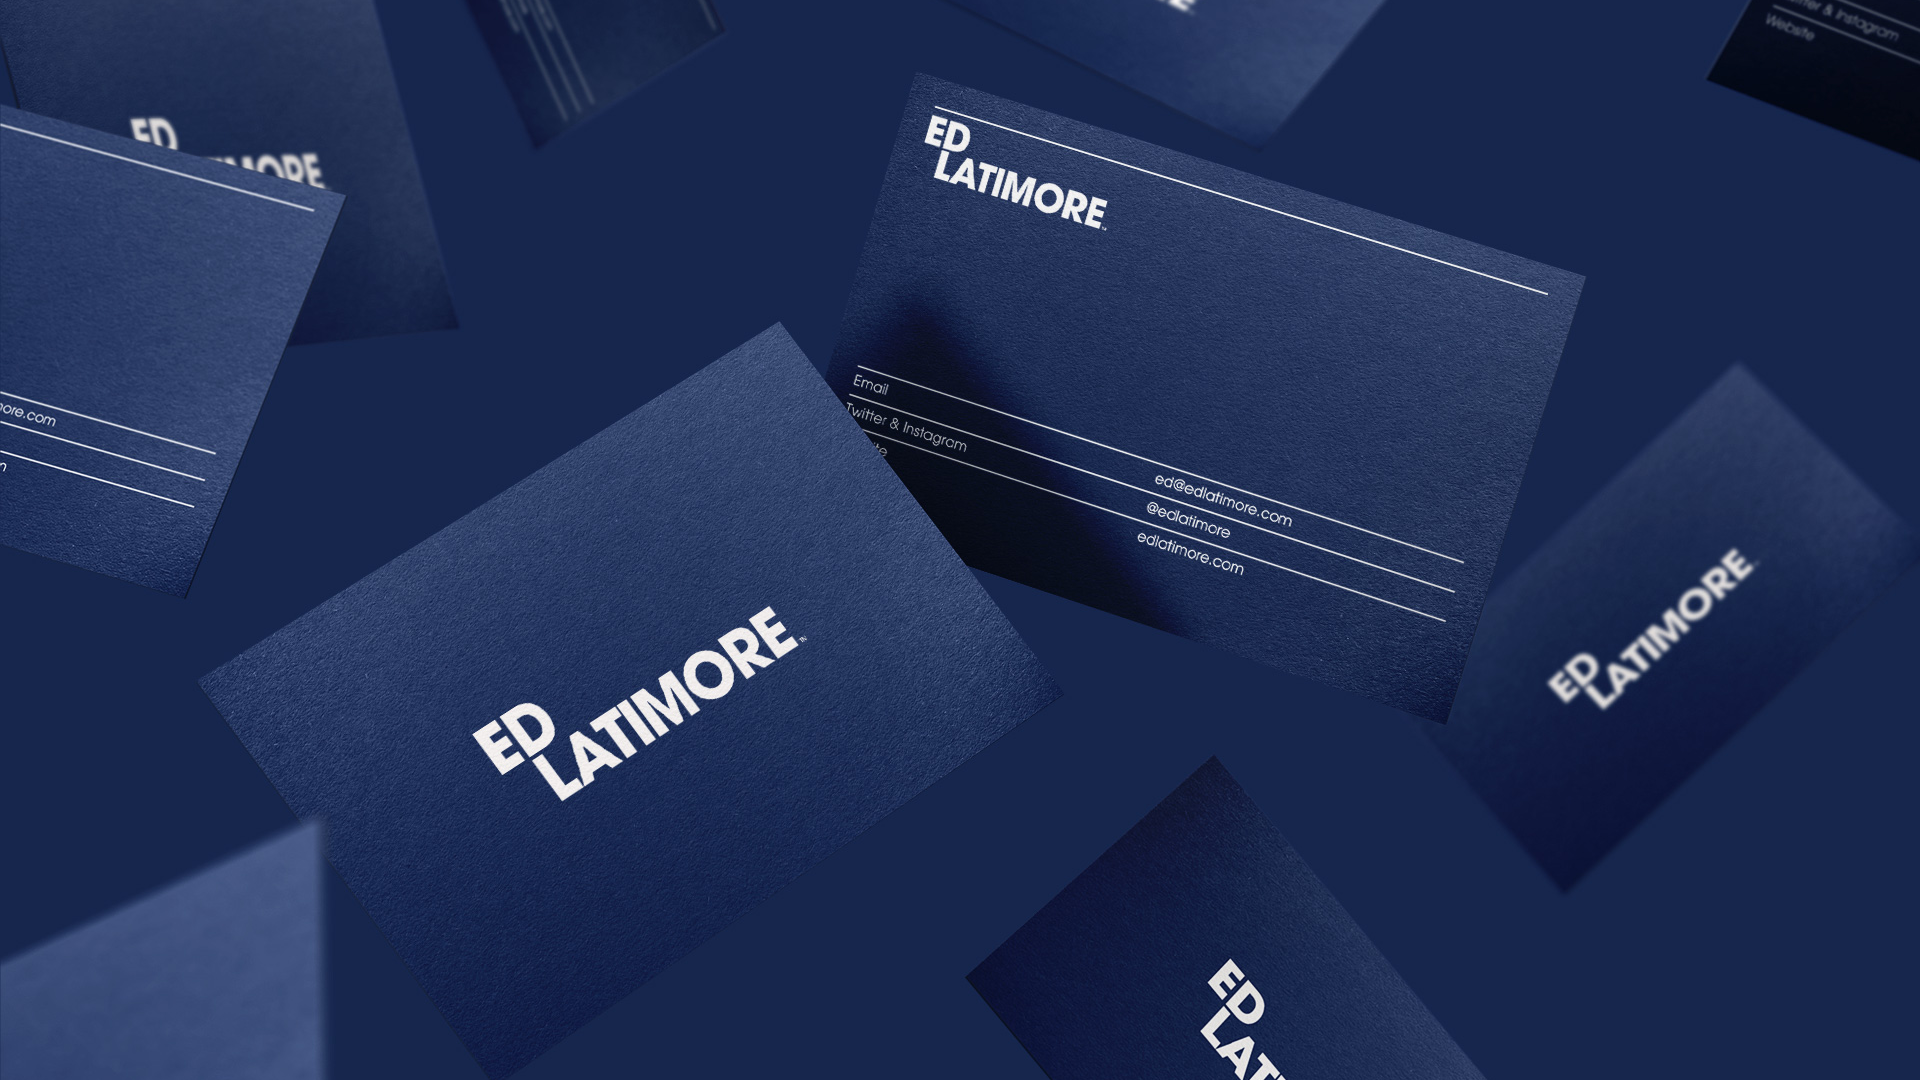 Multiple business cards bearing Ed Latimore's contact information, falling in the air